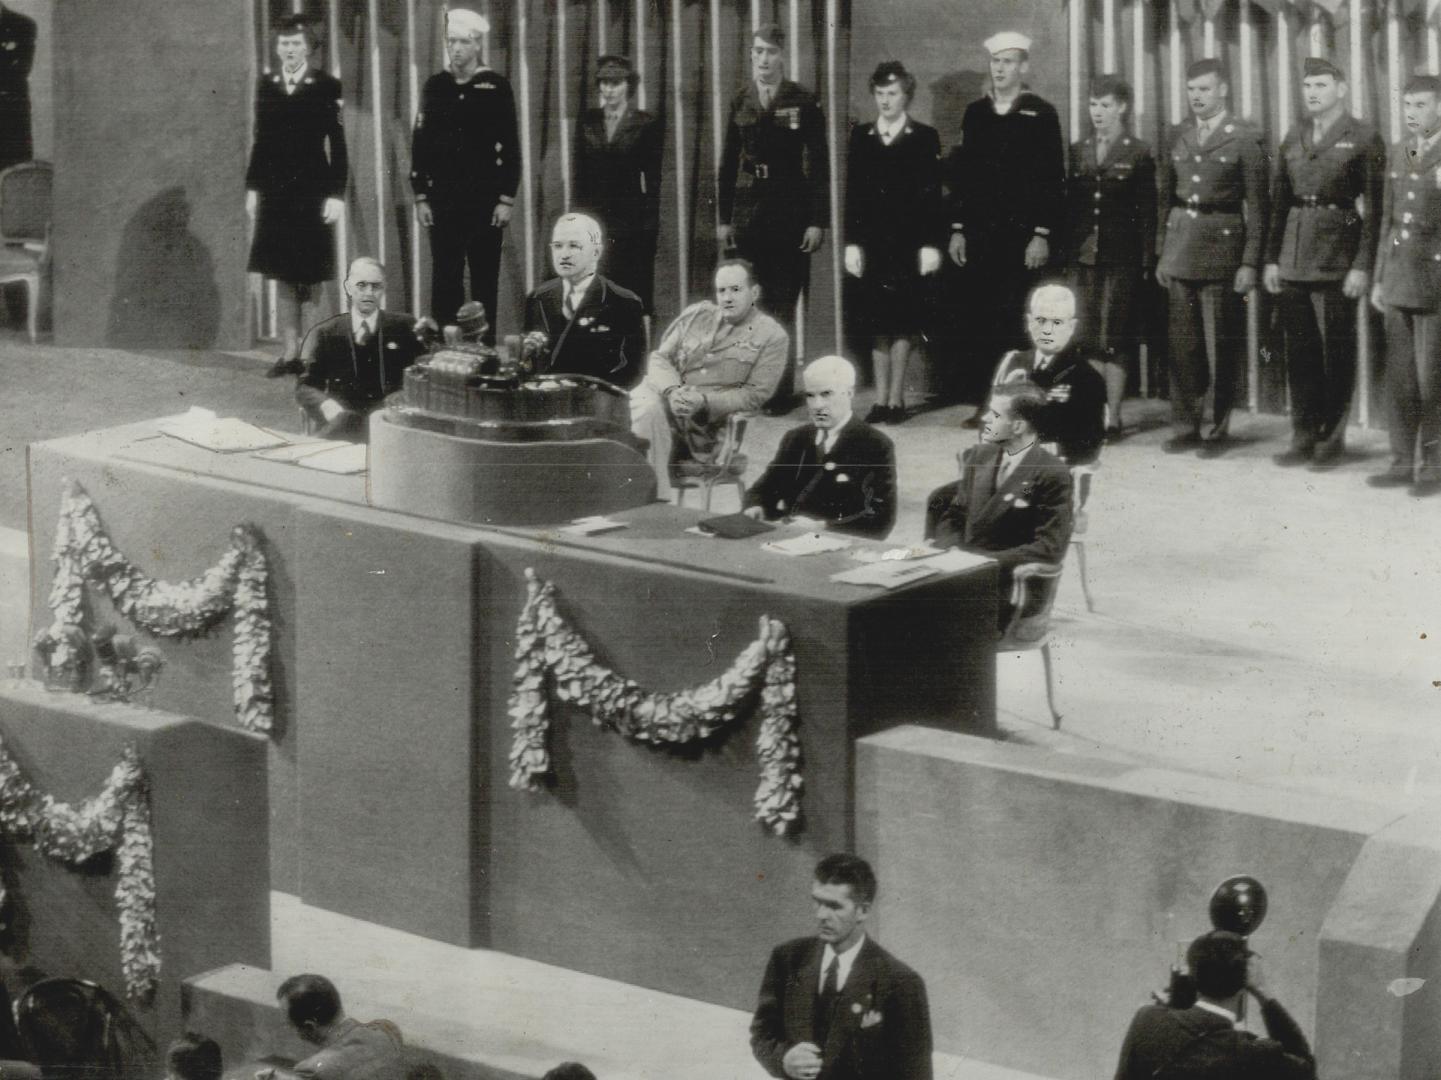 Final address at the San Francisco conference was given by President Truman, seen here on the rostrum as he declared that the new charter created a gr(...)